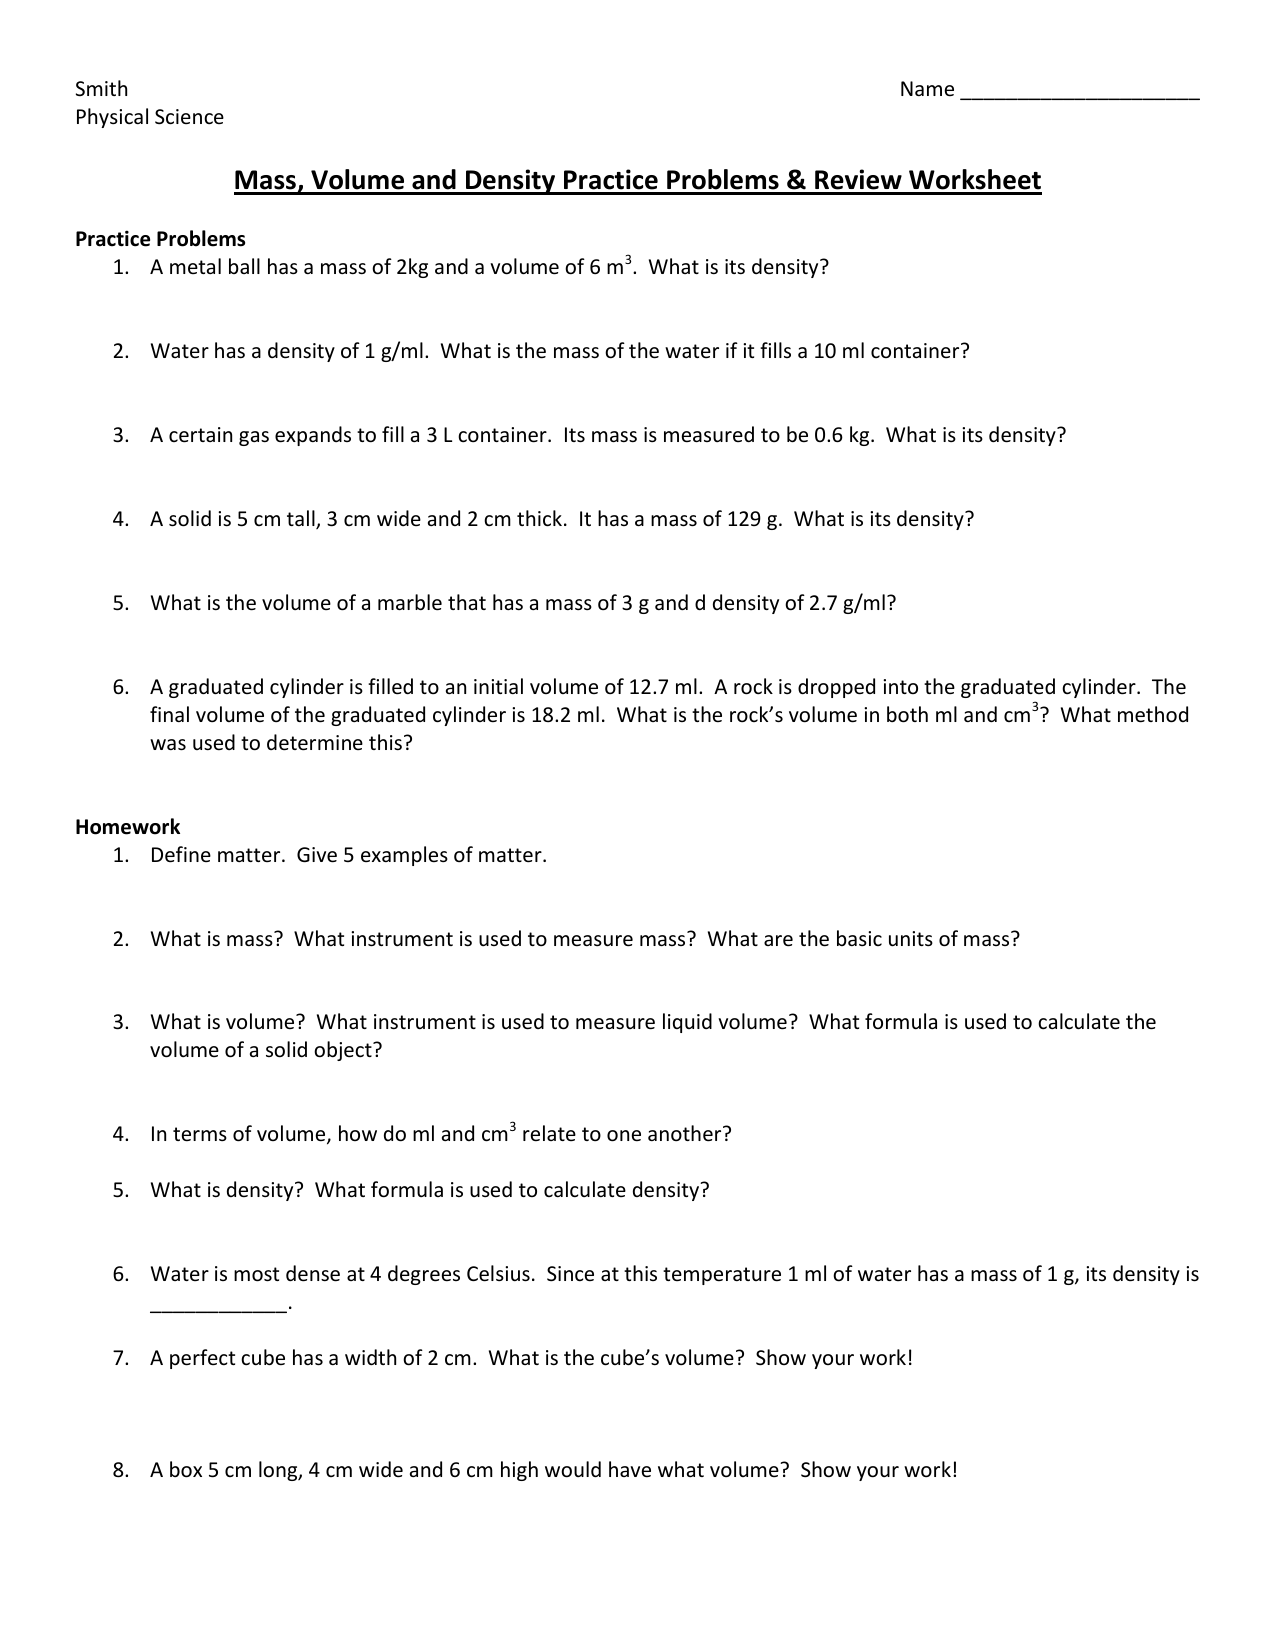 Mass, Volume and Density Review Worksheet Throughout Mass Volume Density Worksheet